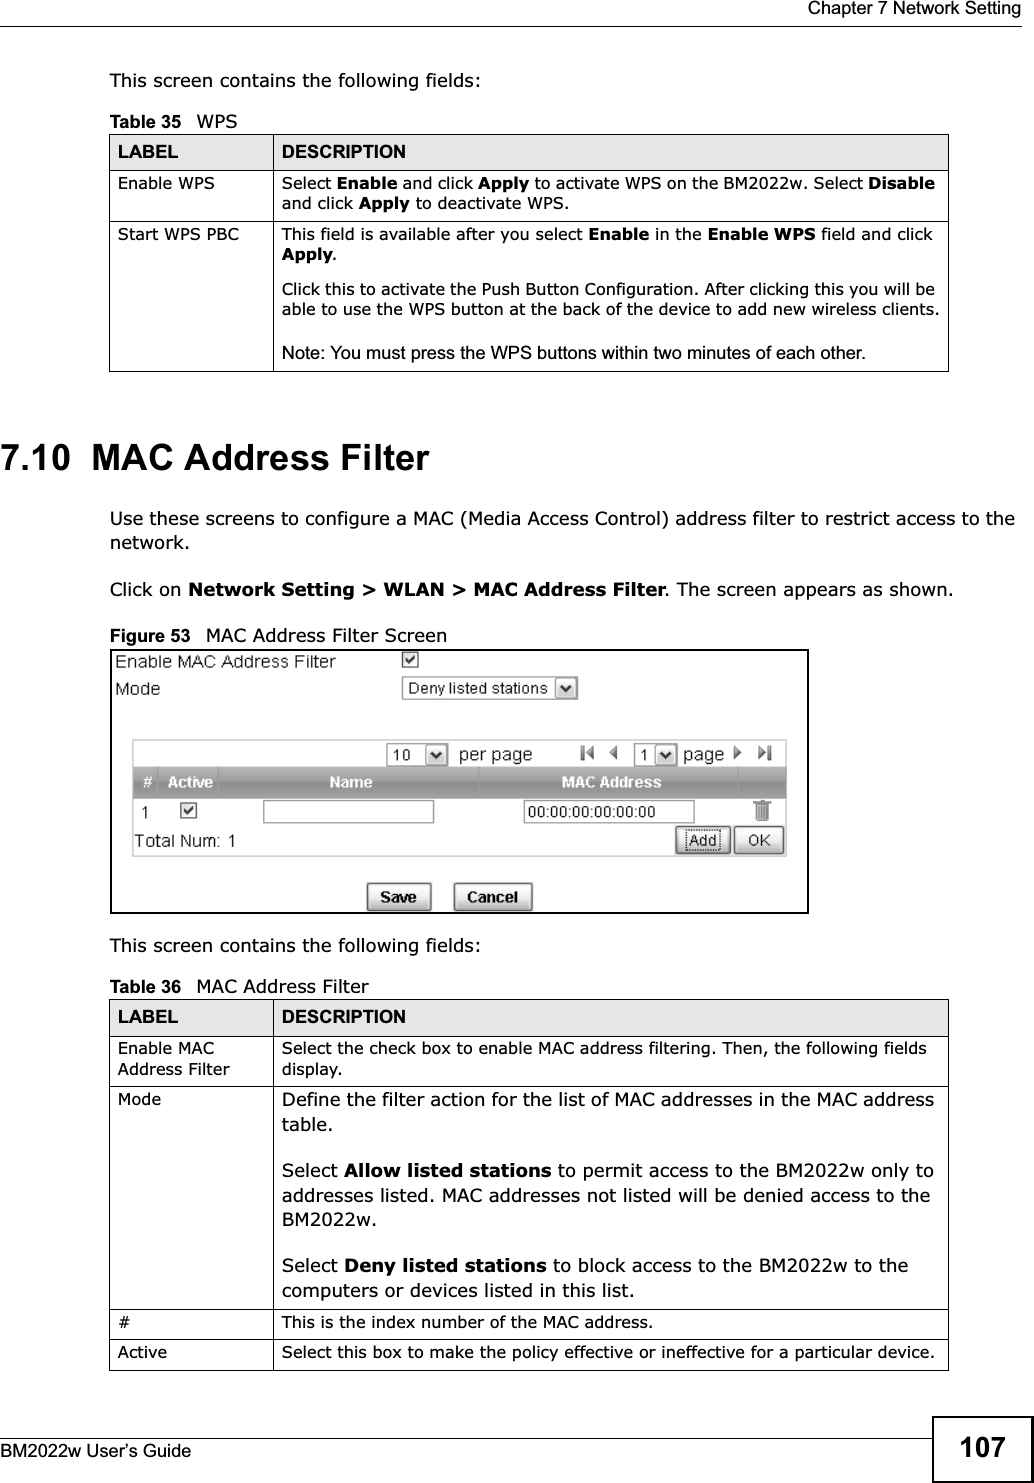  Chapter 7 Network SettingBM2022w User’s Guide 107This screen contains the following fields:7.10  MAC Address FilterUse these screens to configure a MAC (Media Access Control) address filter to restrict access to the network.Click on Network Setting &gt; WLAN &gt; MAC Address Filter. The screen appears as shown.Figure 53   MAC Address Filter ScreenThis screen contains the following fields:Table 35   WPSLABEL DESCRIPTIONEnable WPS Select Enable and click Apply to activate WPS on the BM2022w. Select Disableand click Apply to deactivate WPS.Start WPS PBC This field is available after you select Enable in the Enable WPS field and click Apply.Click this to activate the Push Button Configuration. After clicking this you will be able to use the WPS button at the back of the device to add new wireless clients.Note: You must press the WPS buttons within two minutes of each other.Table 36   MAC Address FilterLABEL DESCRIPTIONEnable MAC Address FilterSelect the check box to enable MAC address filtering. Then, the following fields display.Mode Define the filter action for the list of MAC addresses in the MAC address table.Select Allow listed stations to permit access to the BM2022w only to addresses listed. MAC addresses not listed will be denied access to the BM2022w.Select Deny listed stations to block access to the BM2022w to the computers or devices listed in this list.# This is the index number of the MAC address.Active Select this box to make the policy effective or ineffective for a particular device.